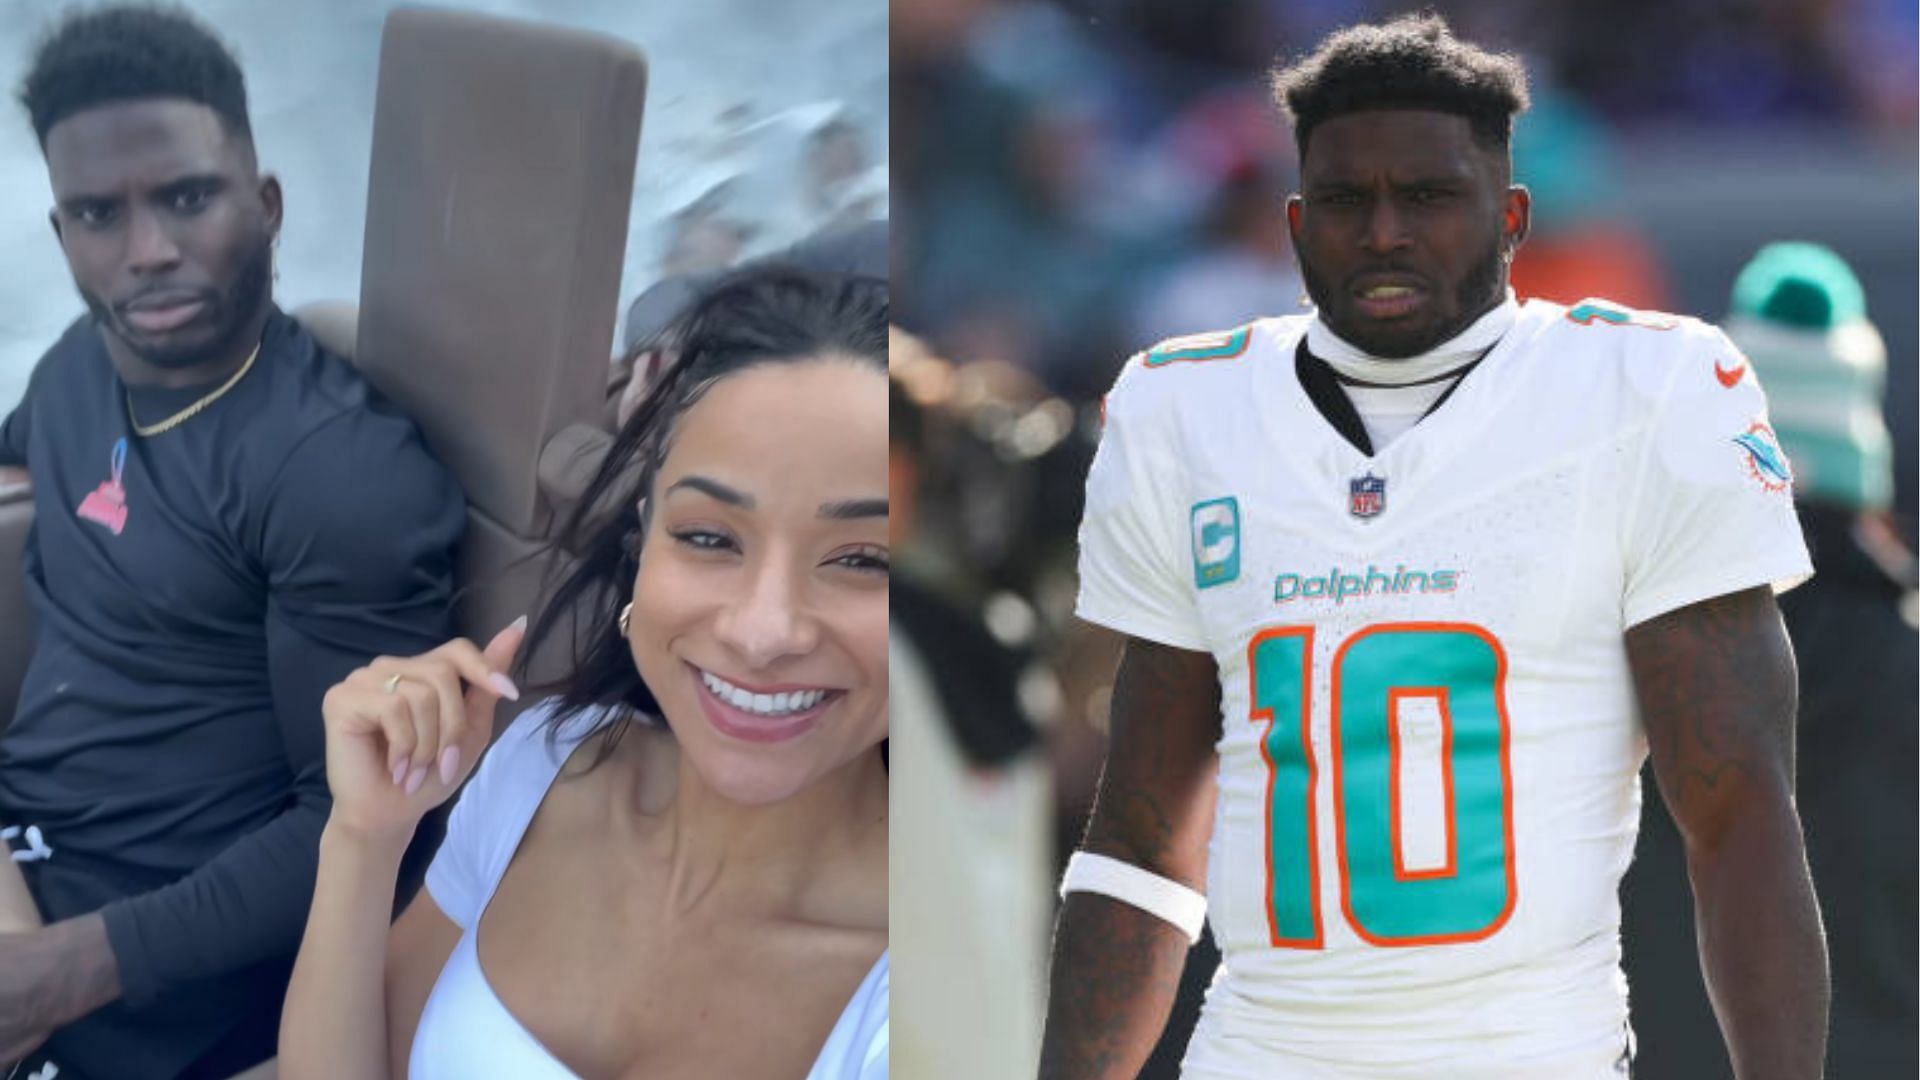 Tyreek Hill and his wife enjoyed some time together at the Pro Bowl.